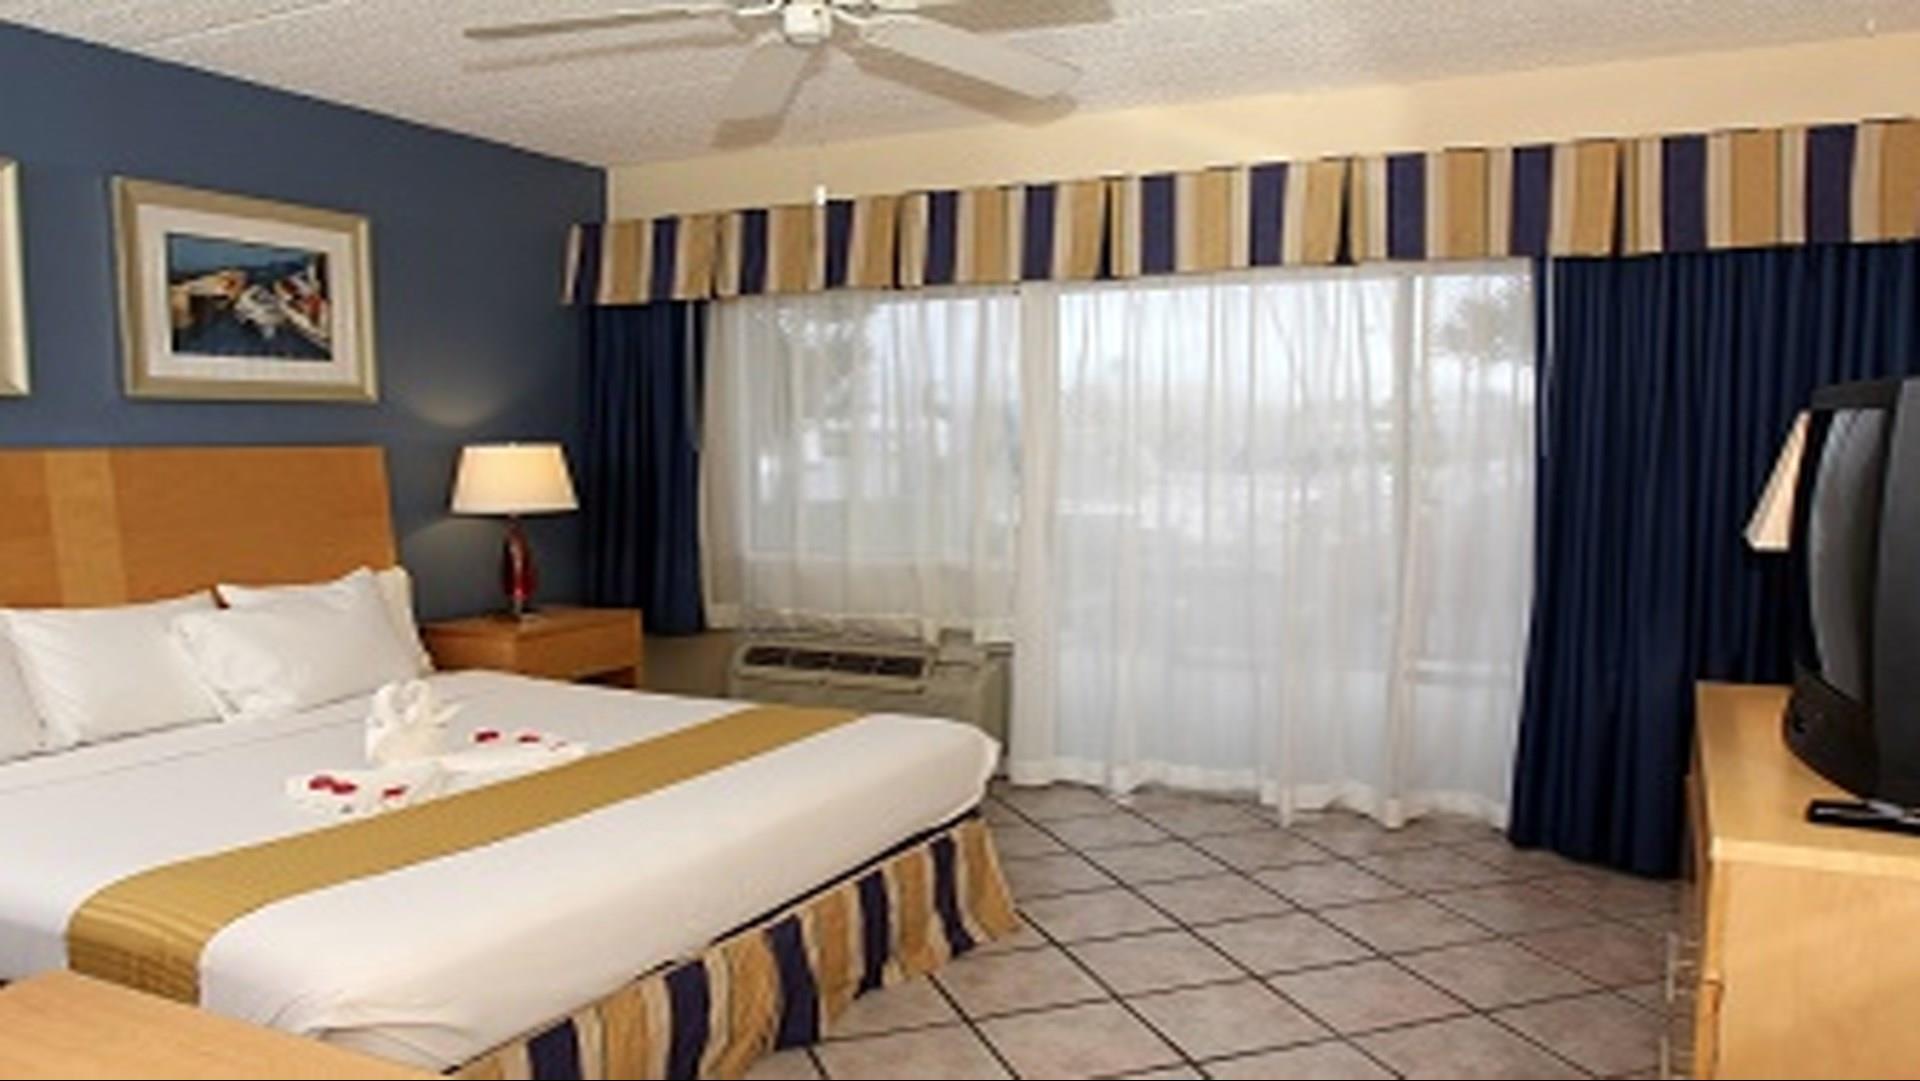 Chart House Suites On Clearwater Bay in Clearwater, FL